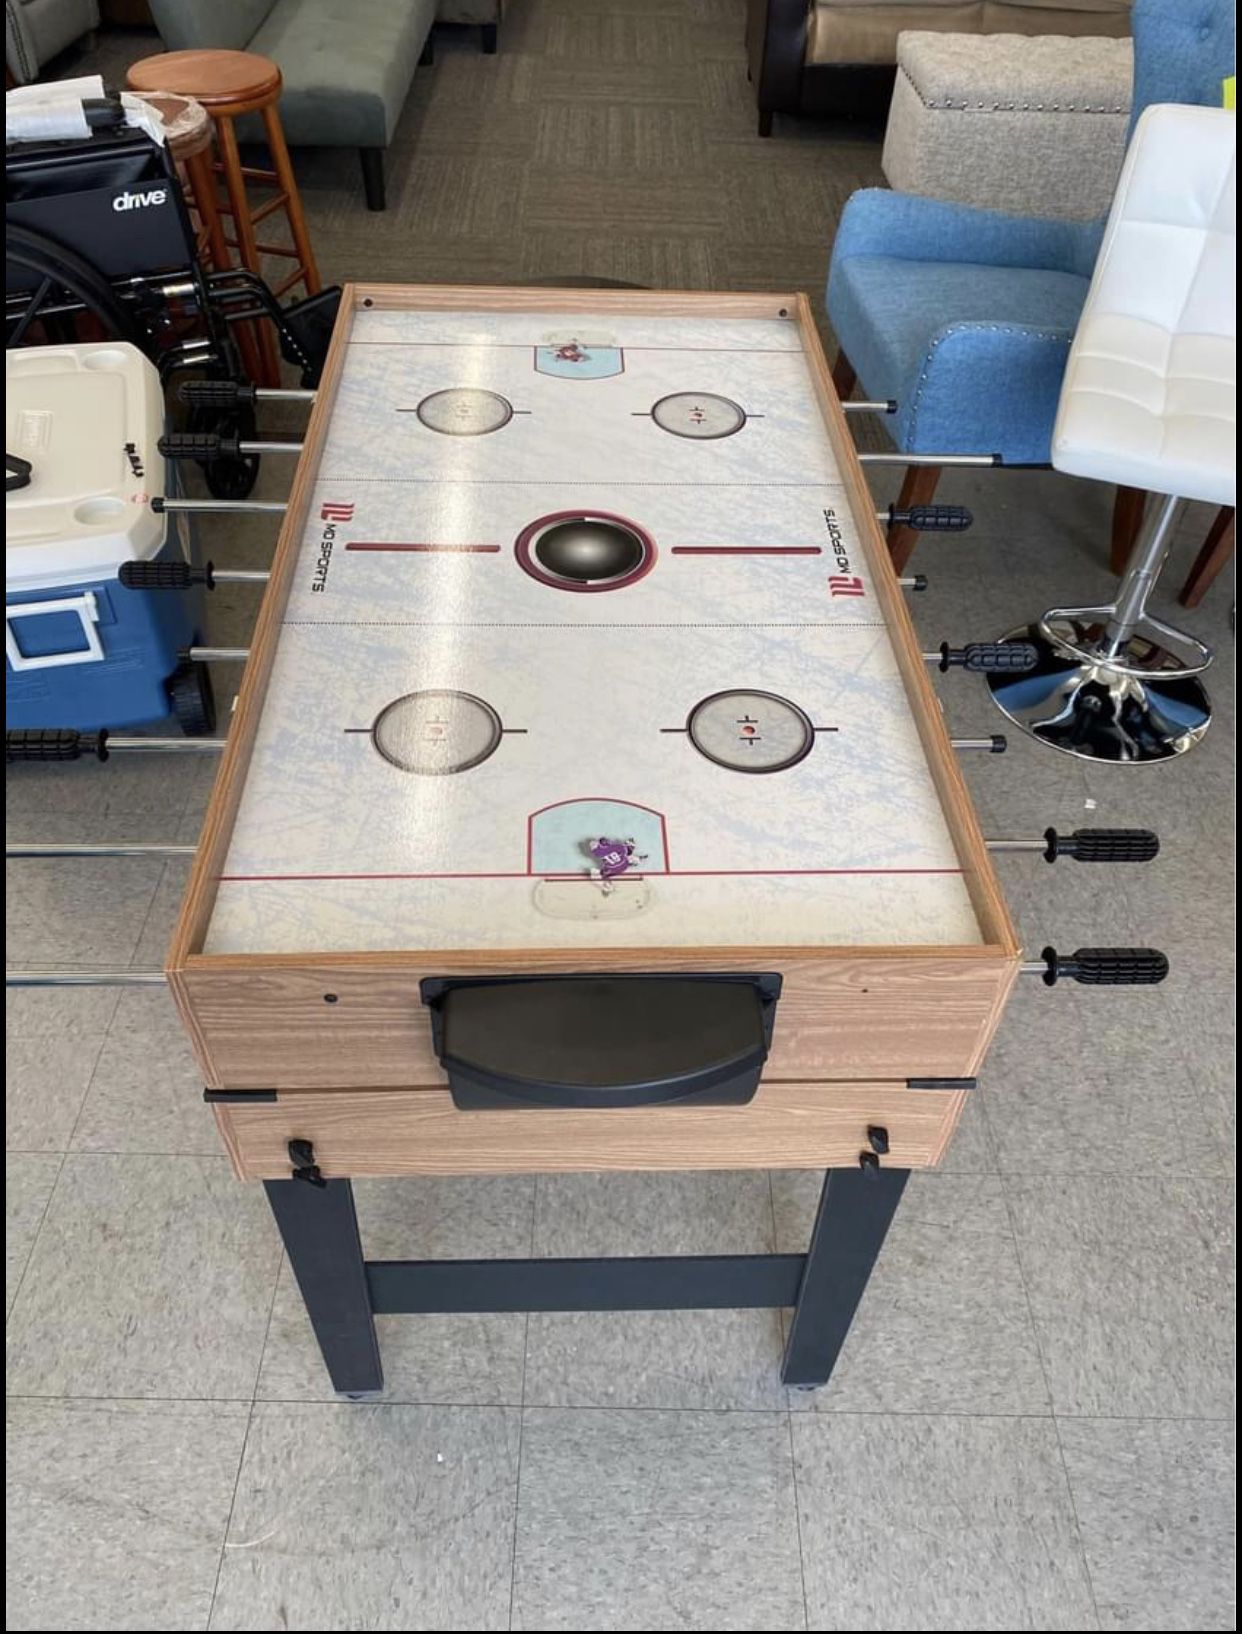 MD Sports 48" 3 In 1 Combo Game Table, Pool, Hockey, Foosball, Accessories Included